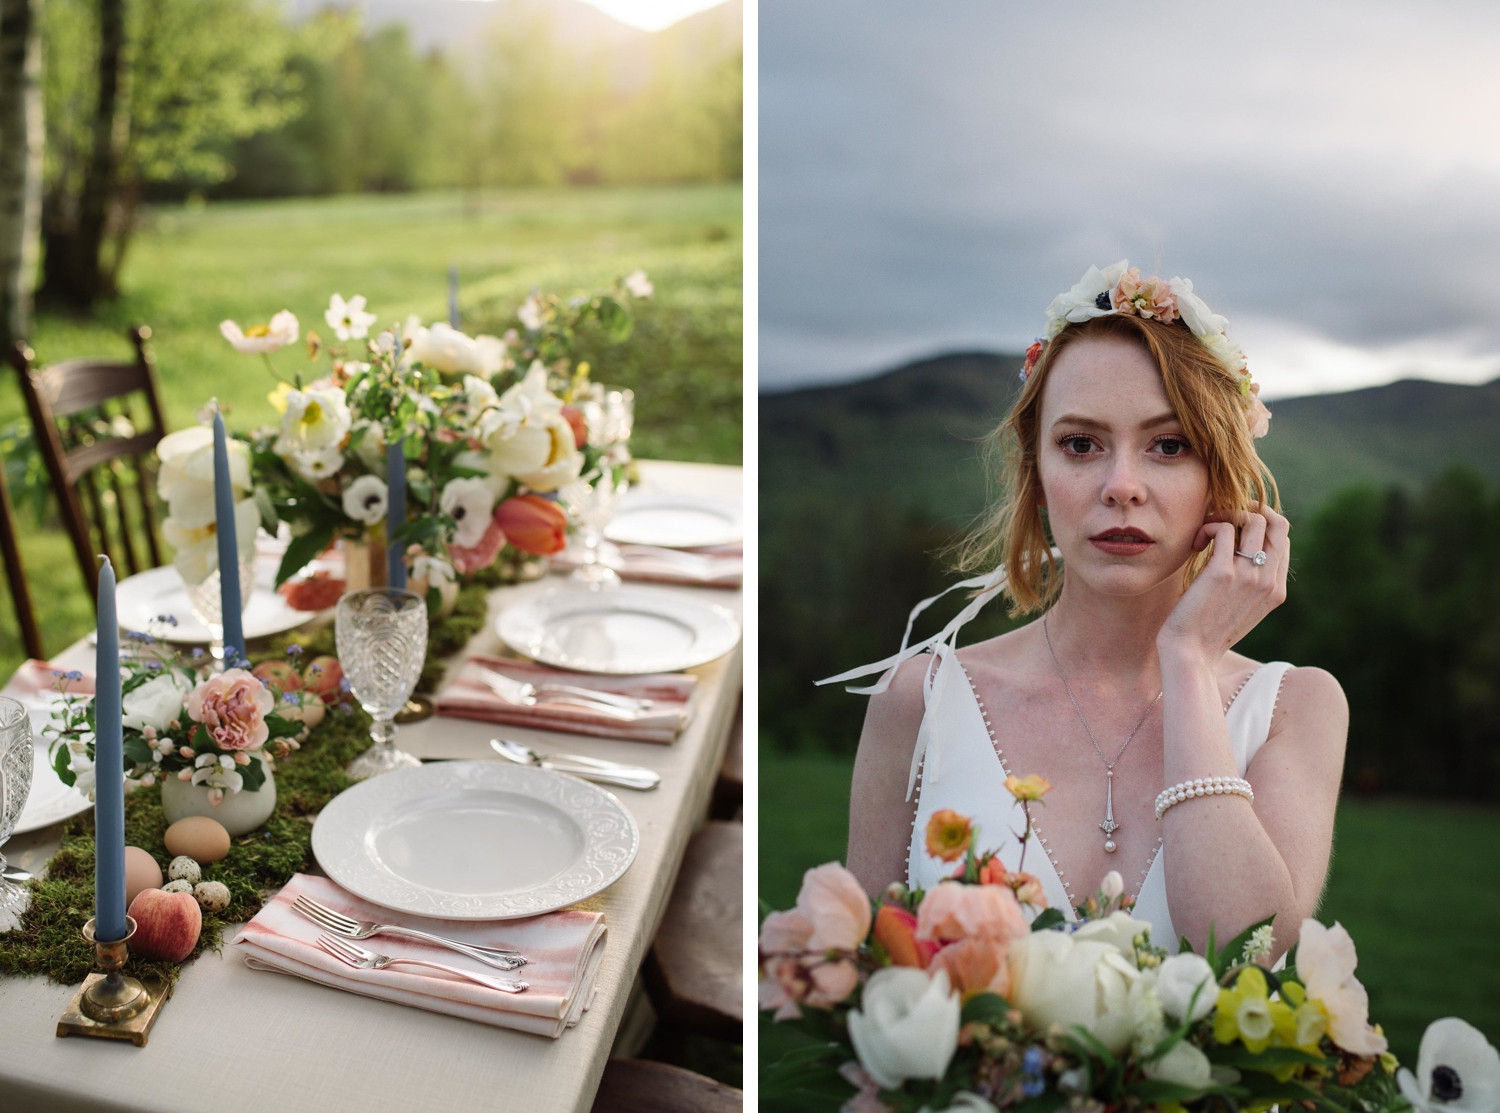 Spring wedding inspiration at Trapp Family Lodge